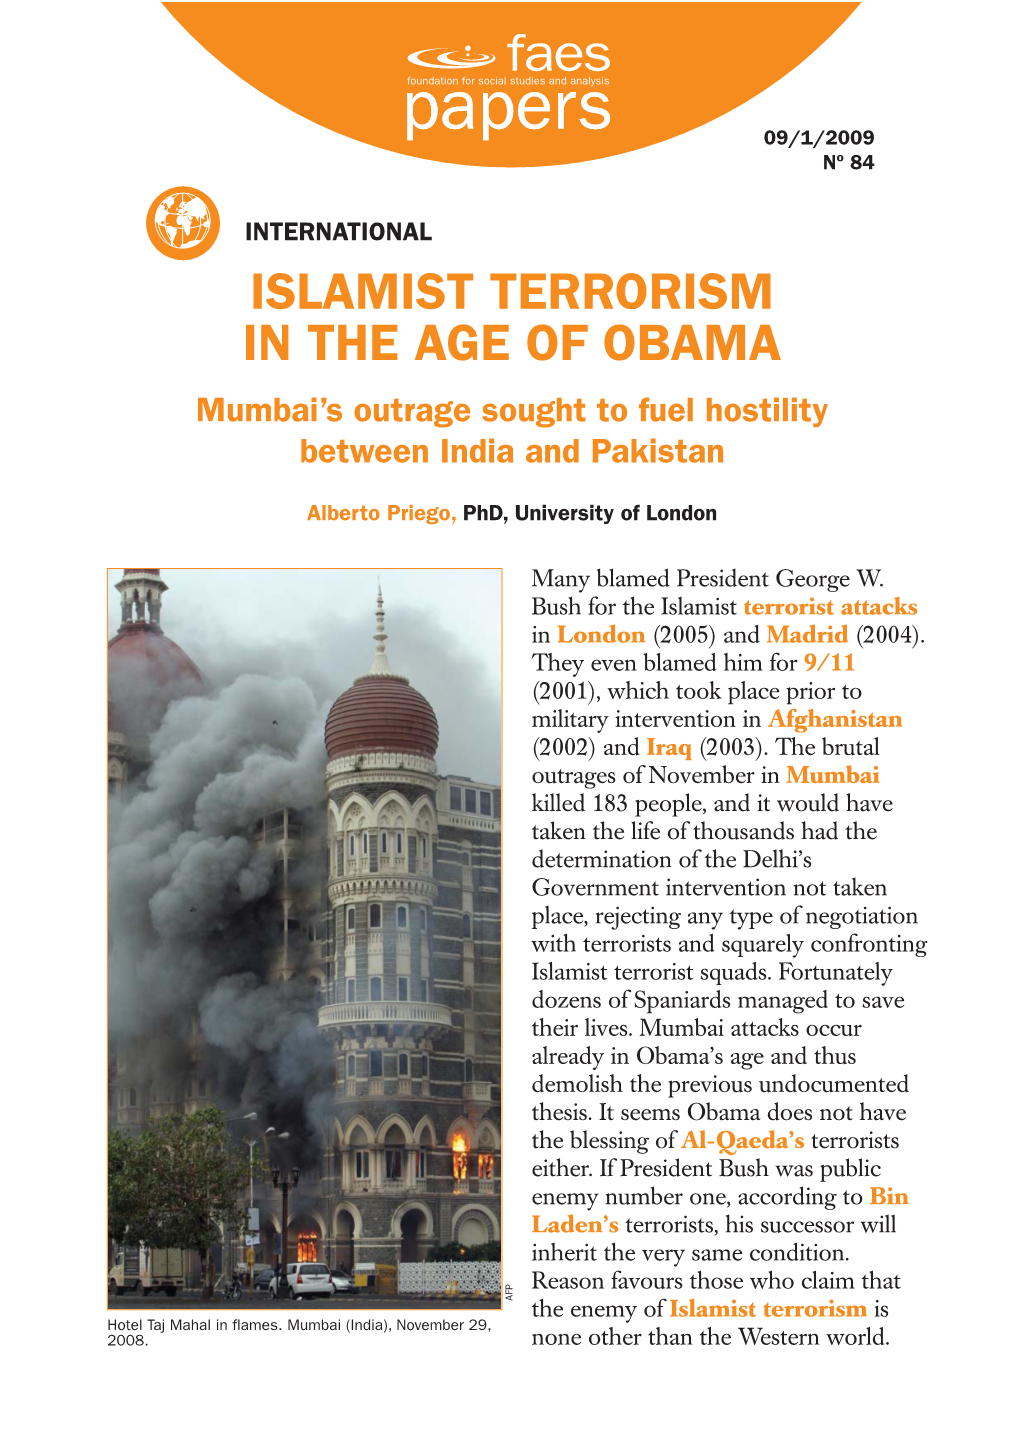 ISLAMIST TERRORISM in the AGE of OBAMA Mumbai’S Outrage Sought to Fuel Hostility Between India and Pakistan